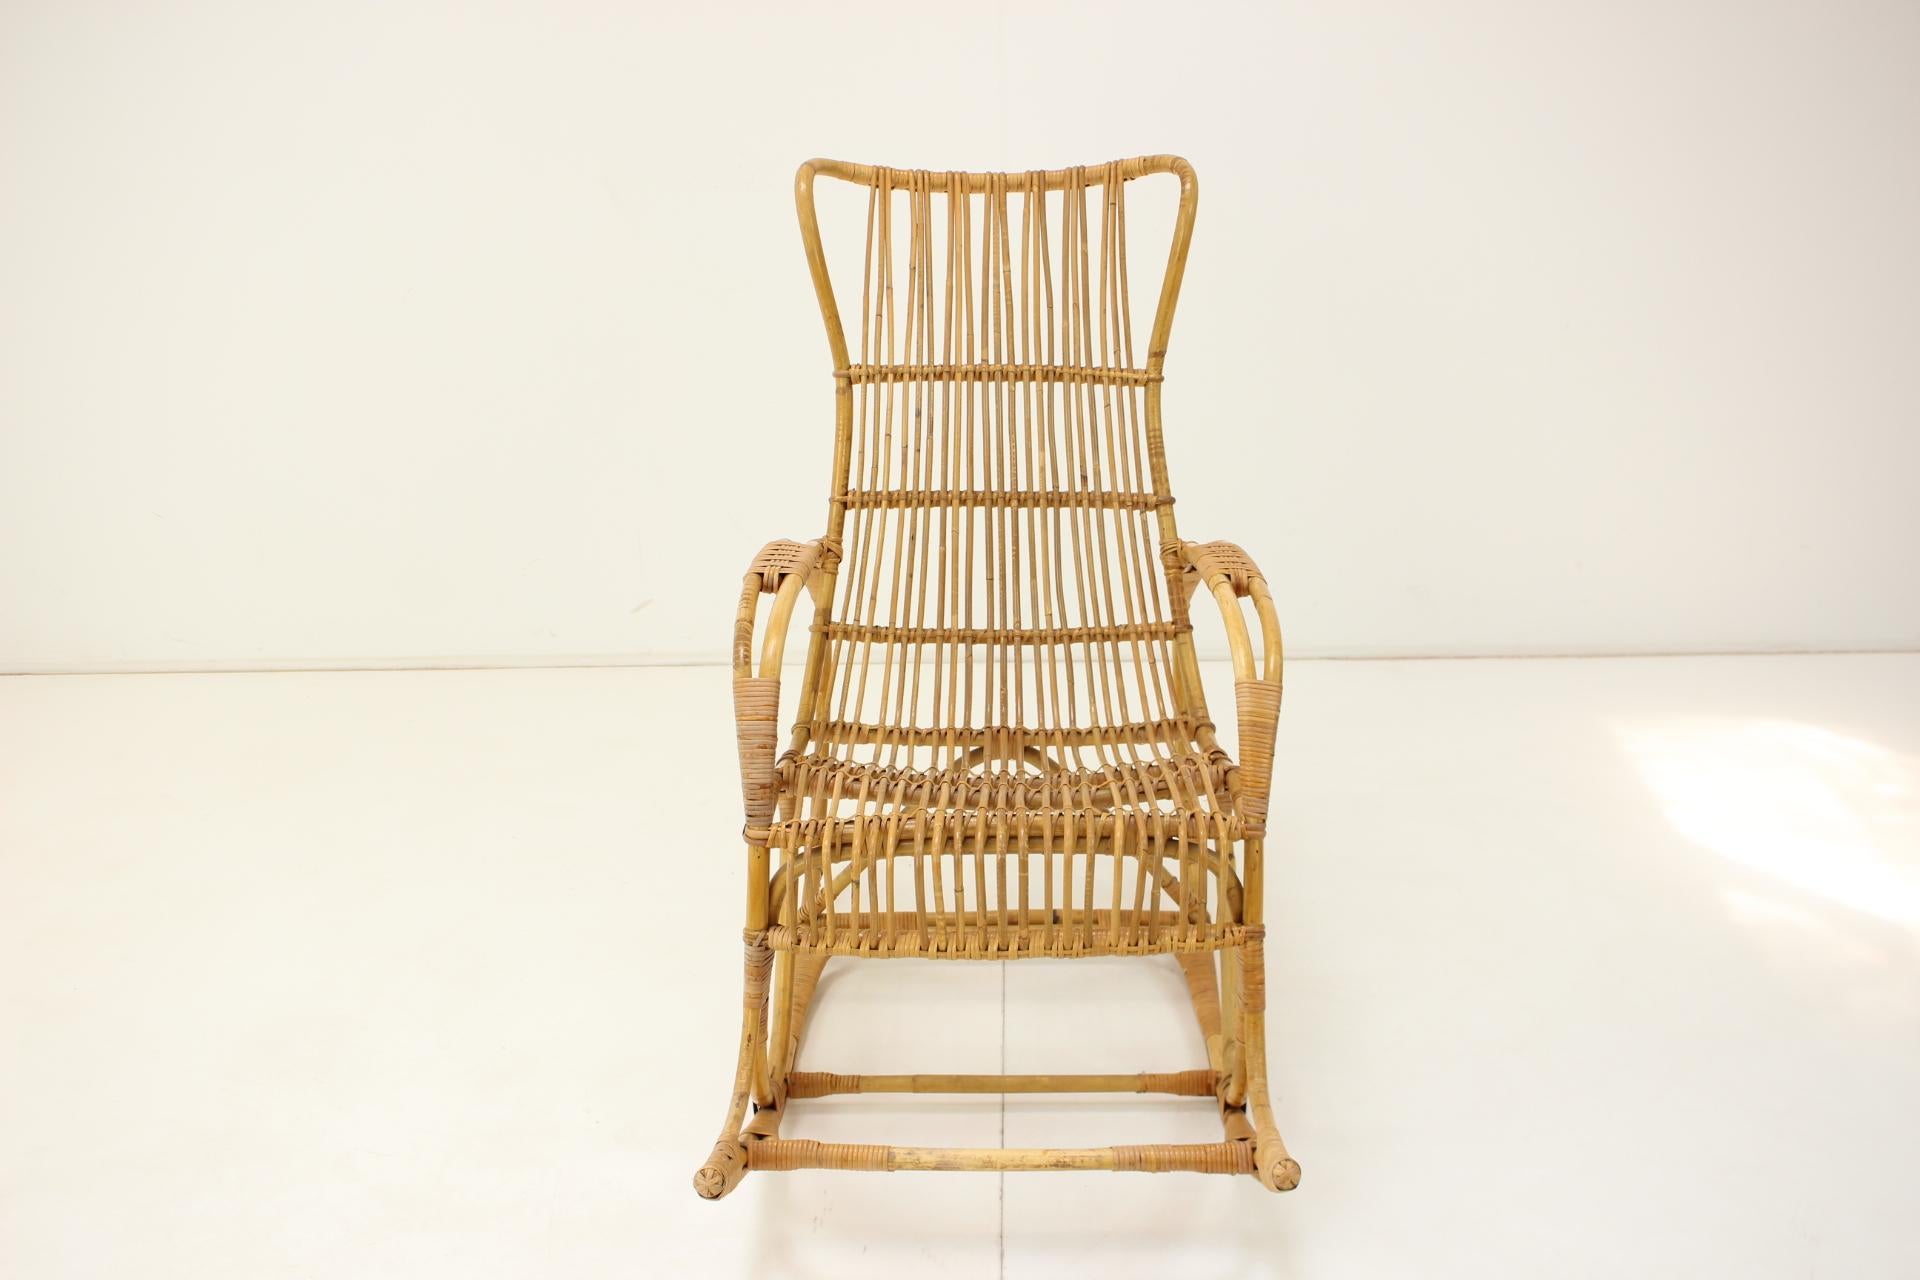 - Made in Czechoslovakia
- Made of rattan.
- Good original condition.